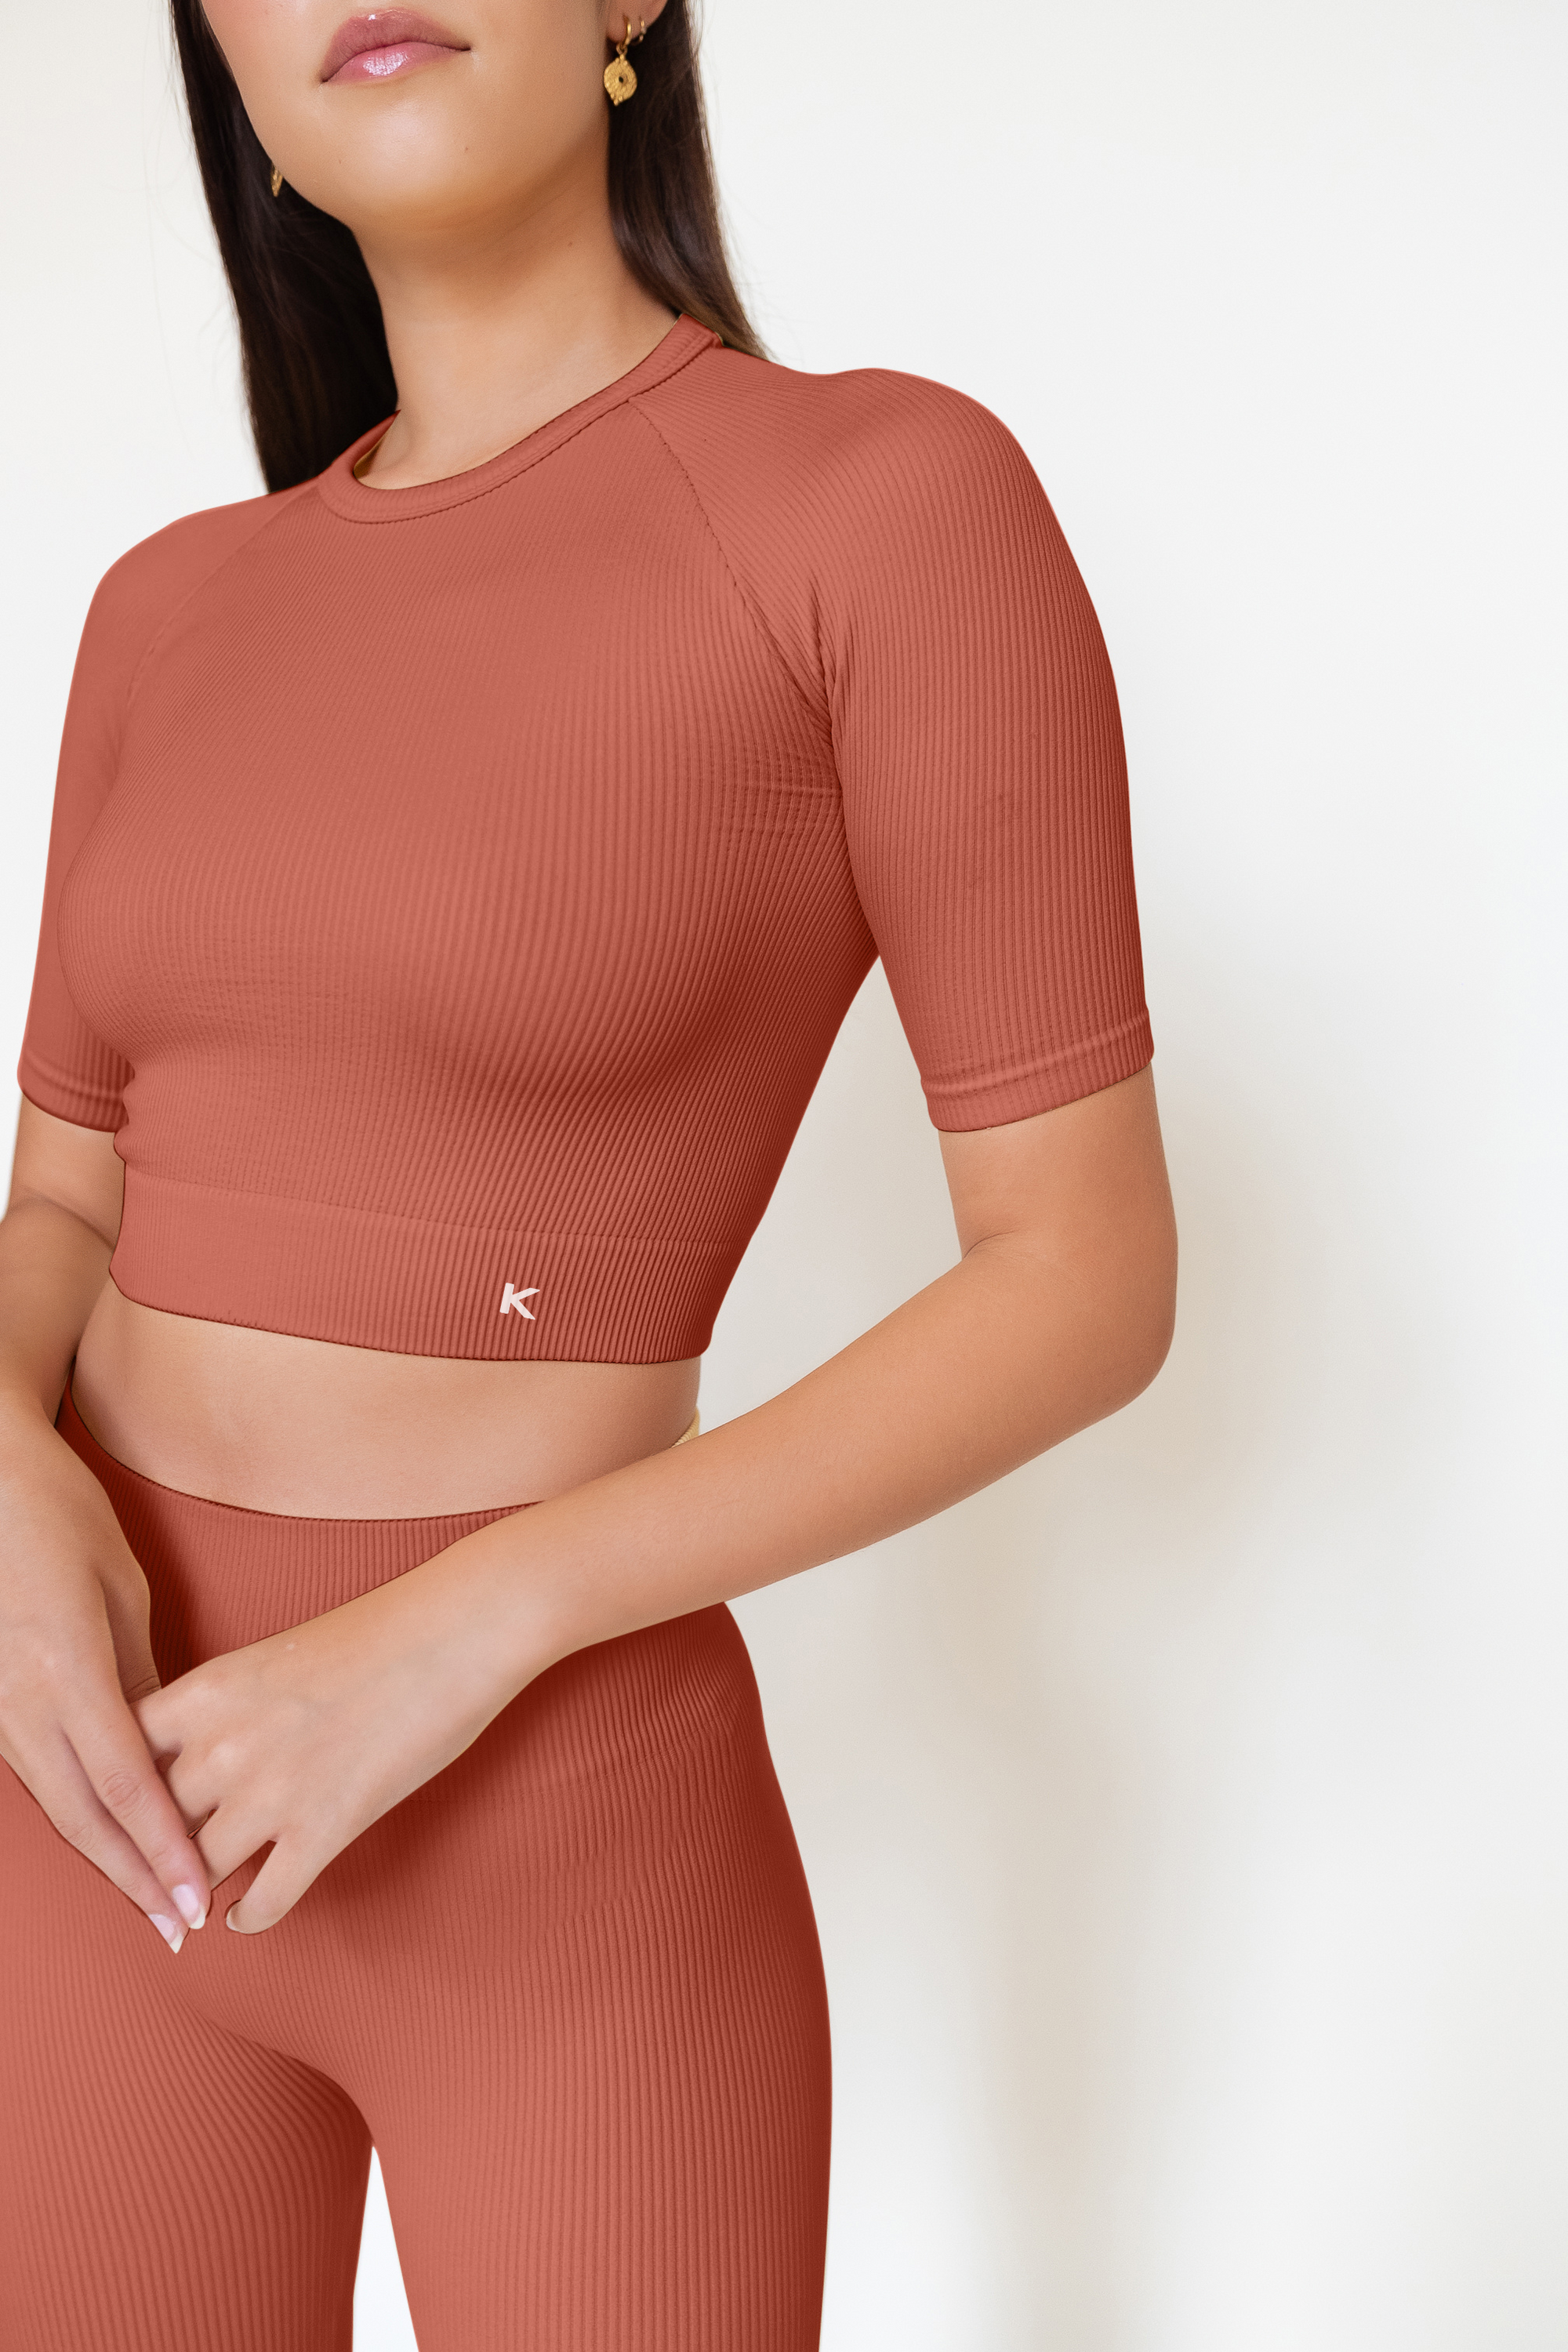 Recycled Plastic Seamless Short Sleeved Top by Kaly Ora - Terracotta